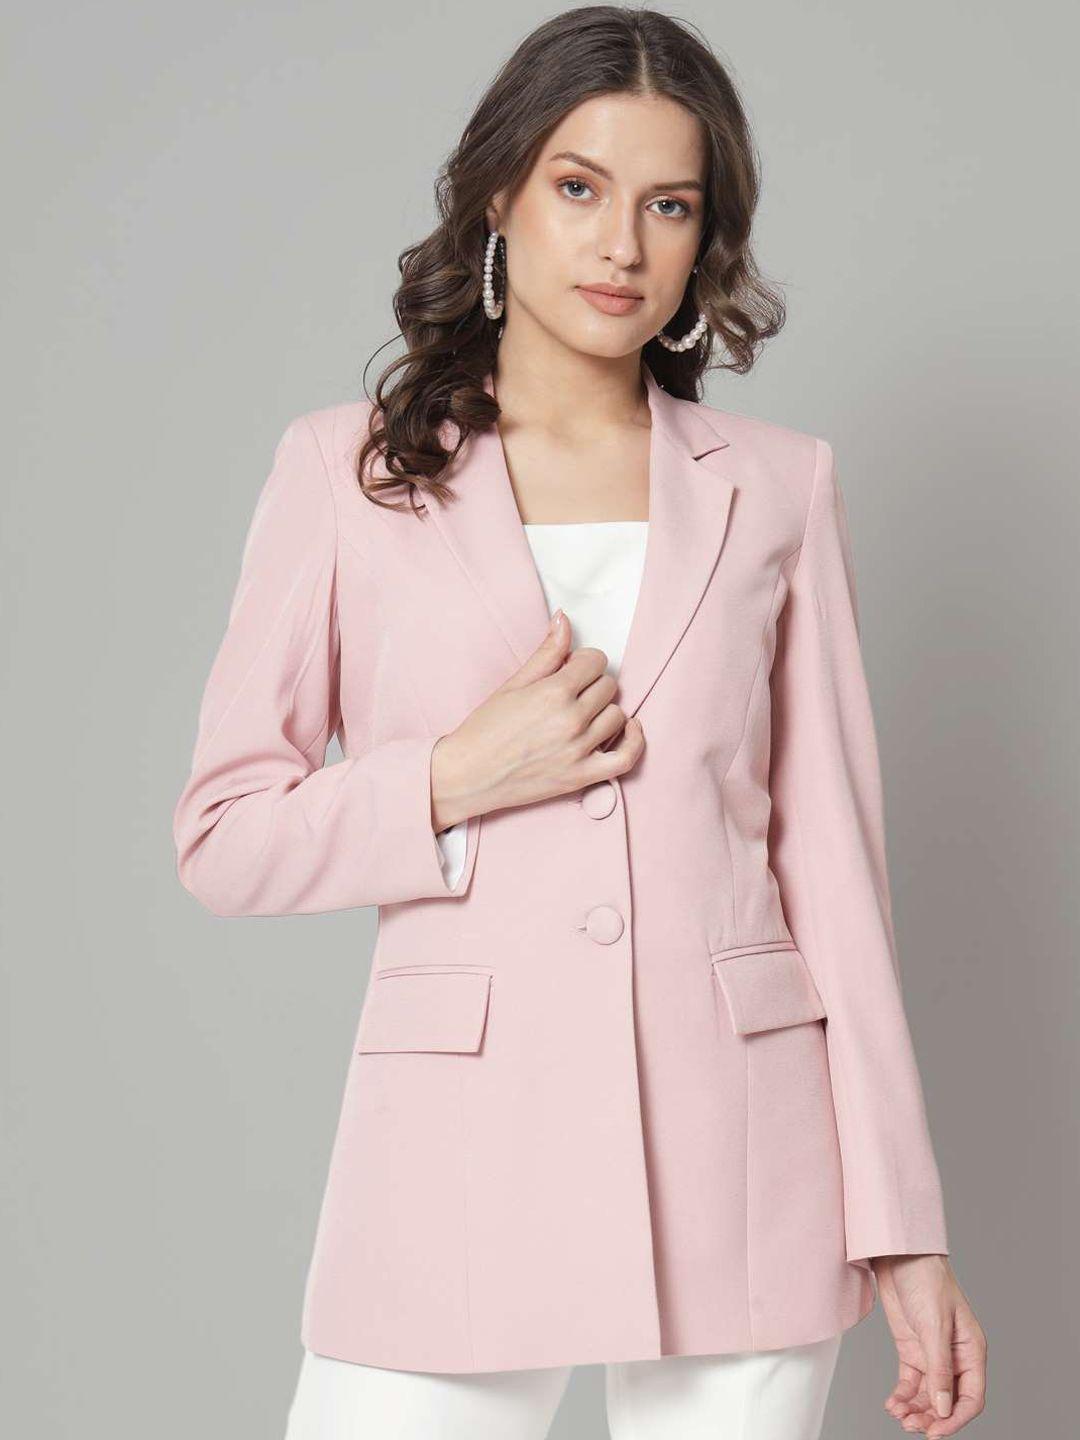 powersutra notched lapel single-breasted blazer